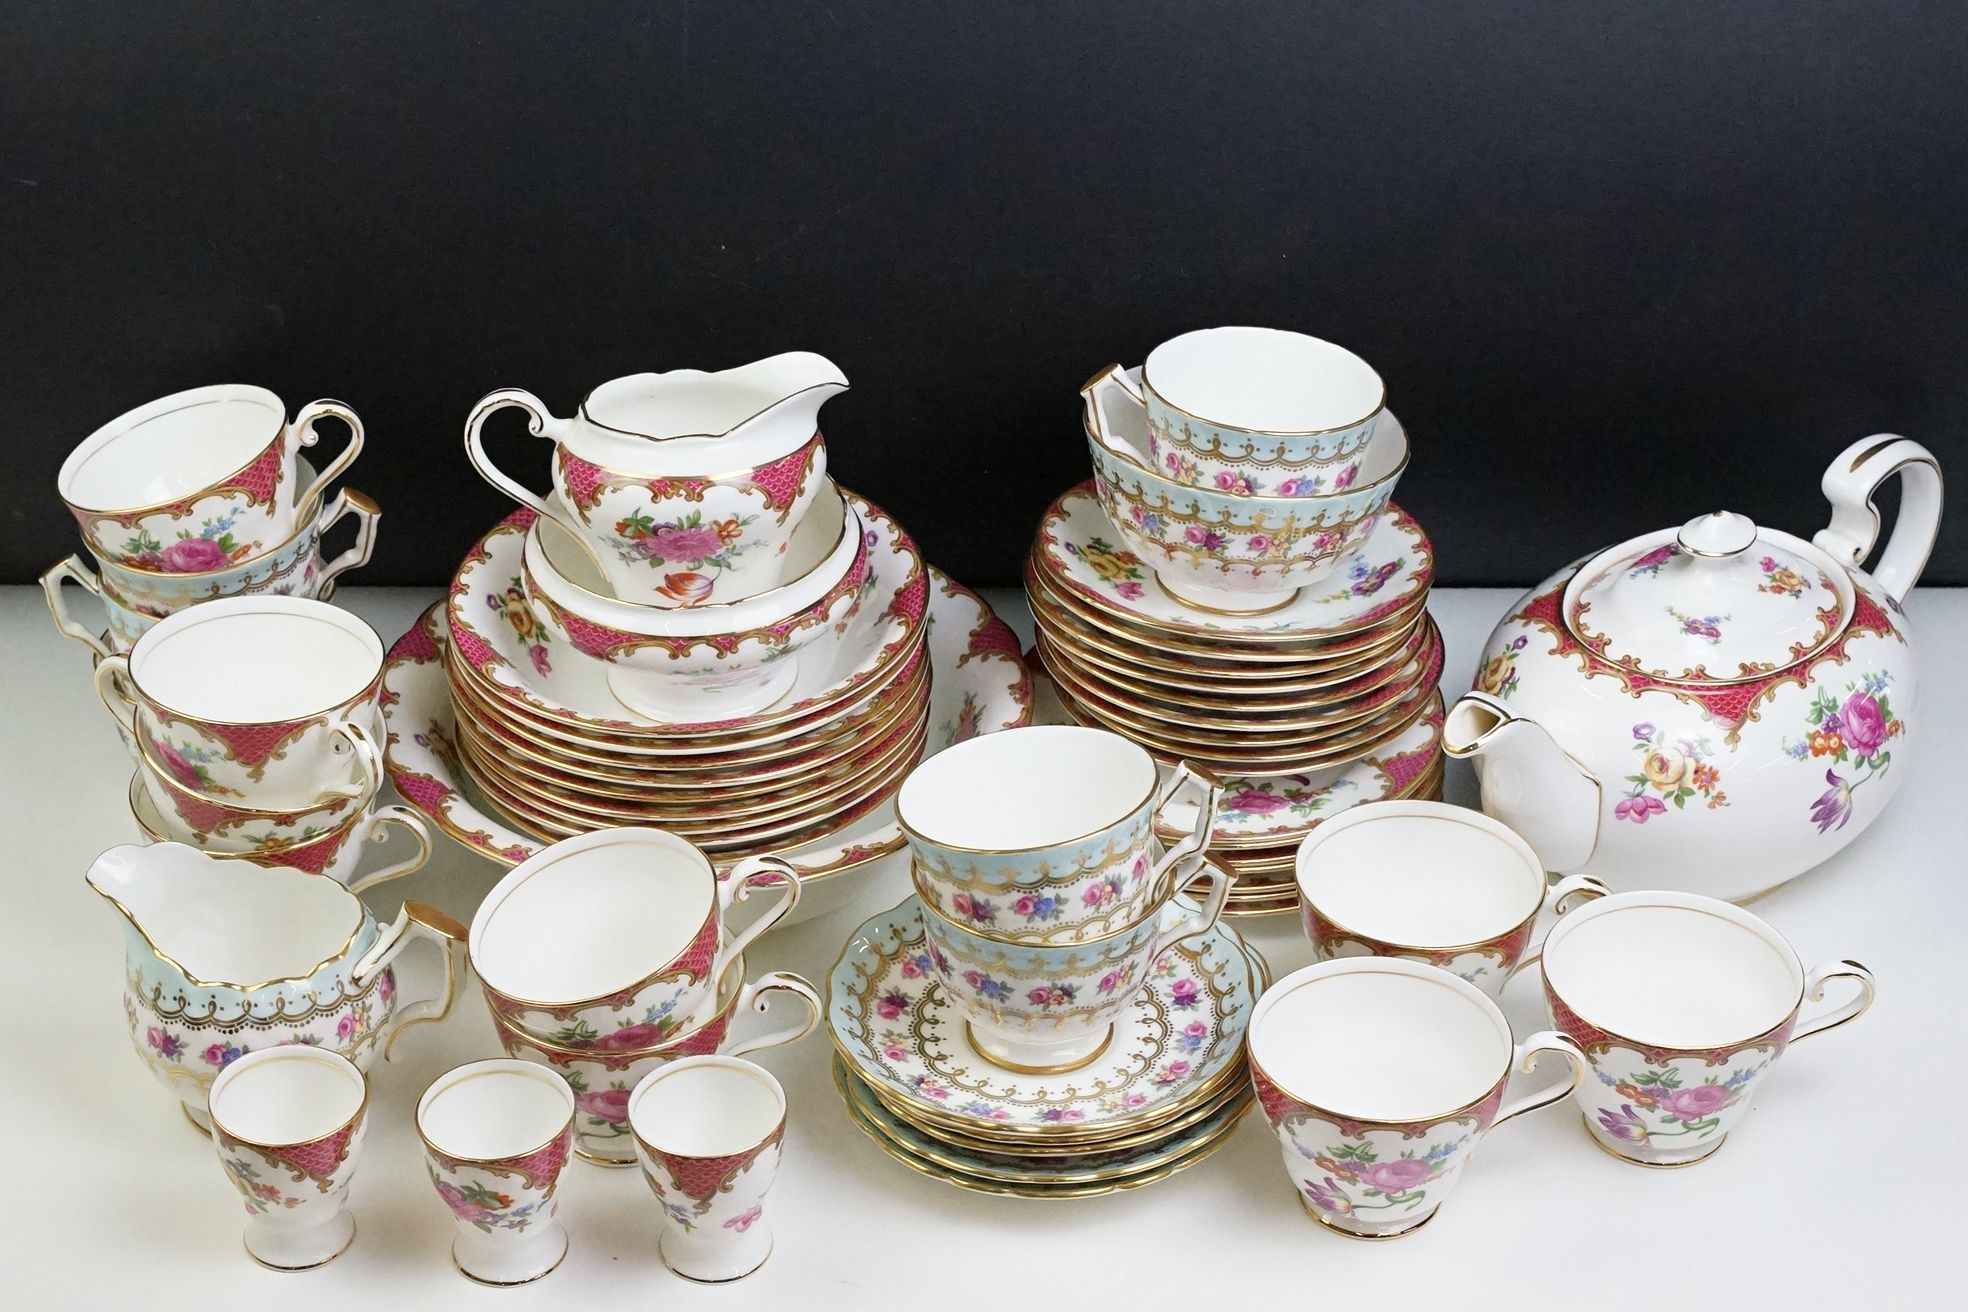 Aynsley porcelain floral tea set, pattern no. B971, to include teapot, 8 cups, 9 saucers, 7 tea